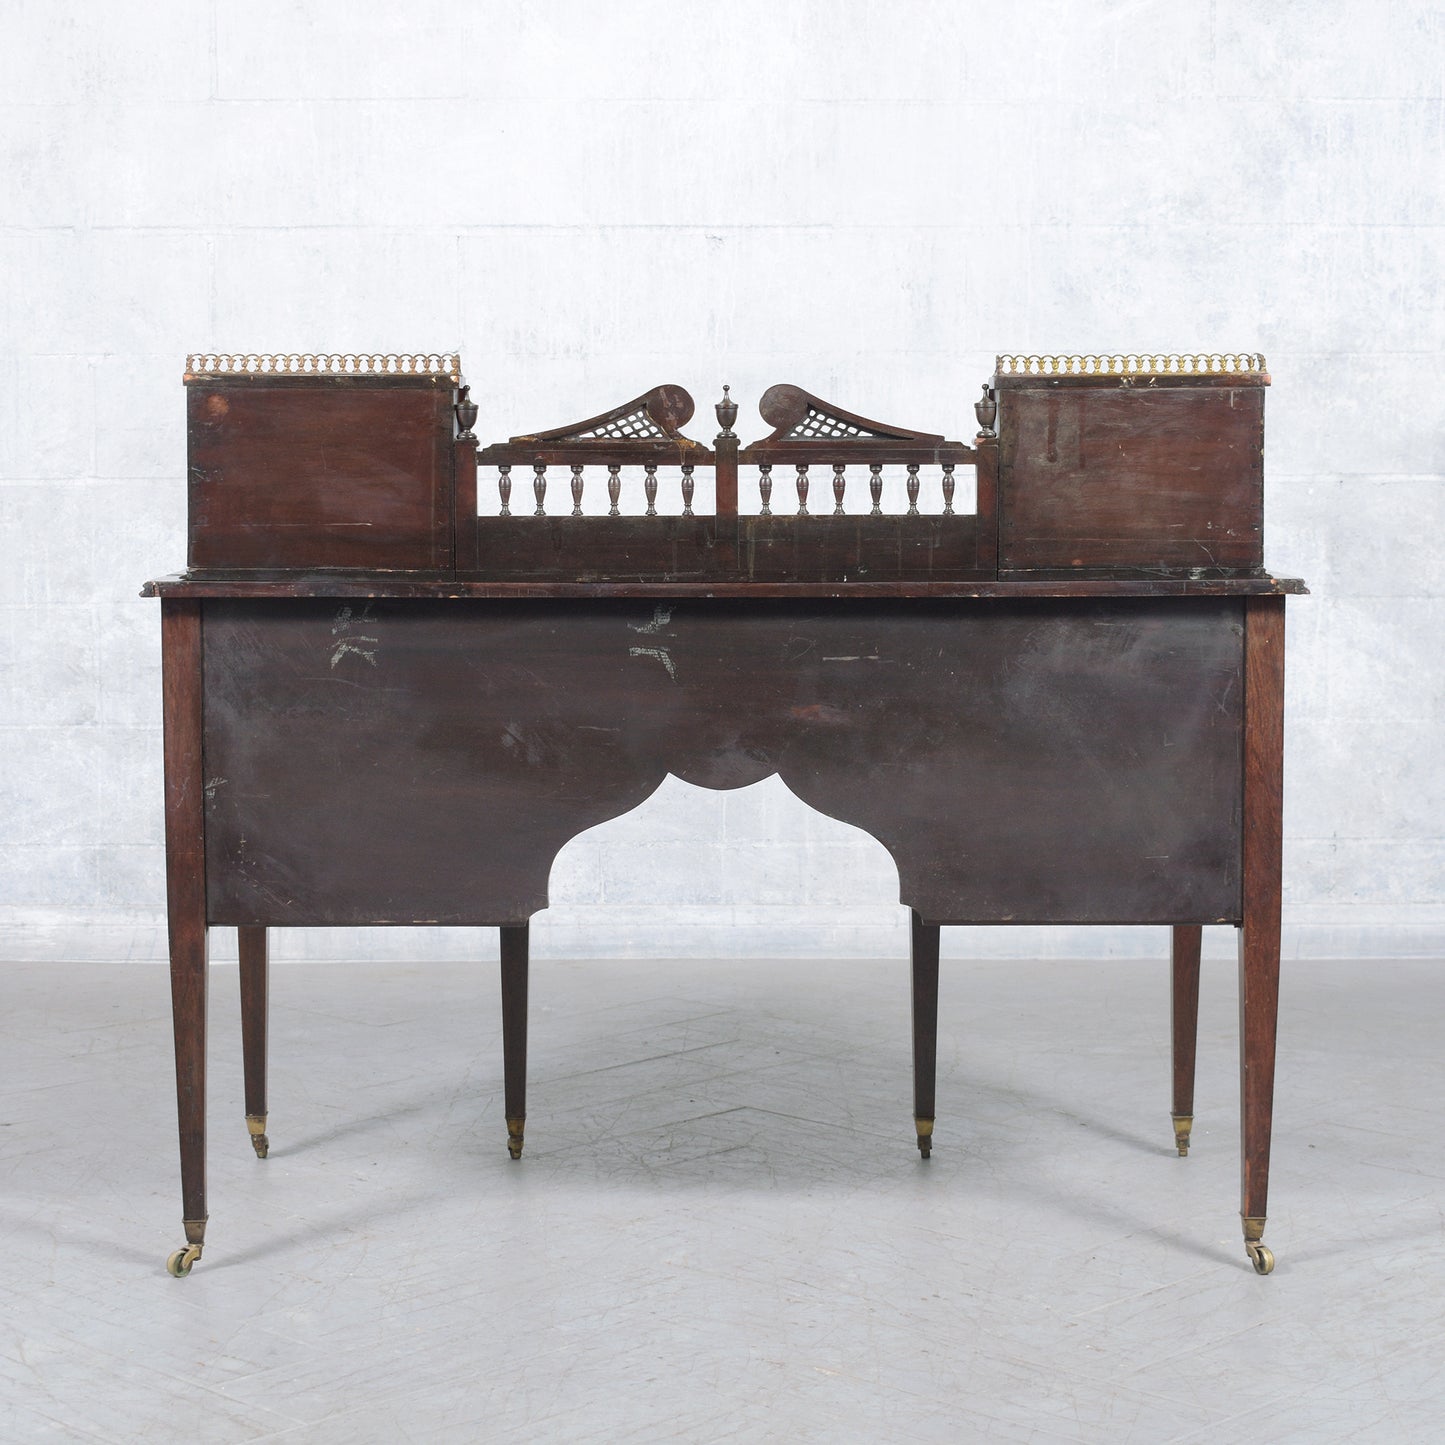 1890s Antique English Carlton Writing Desk with Mahogany and Inlay Veneers